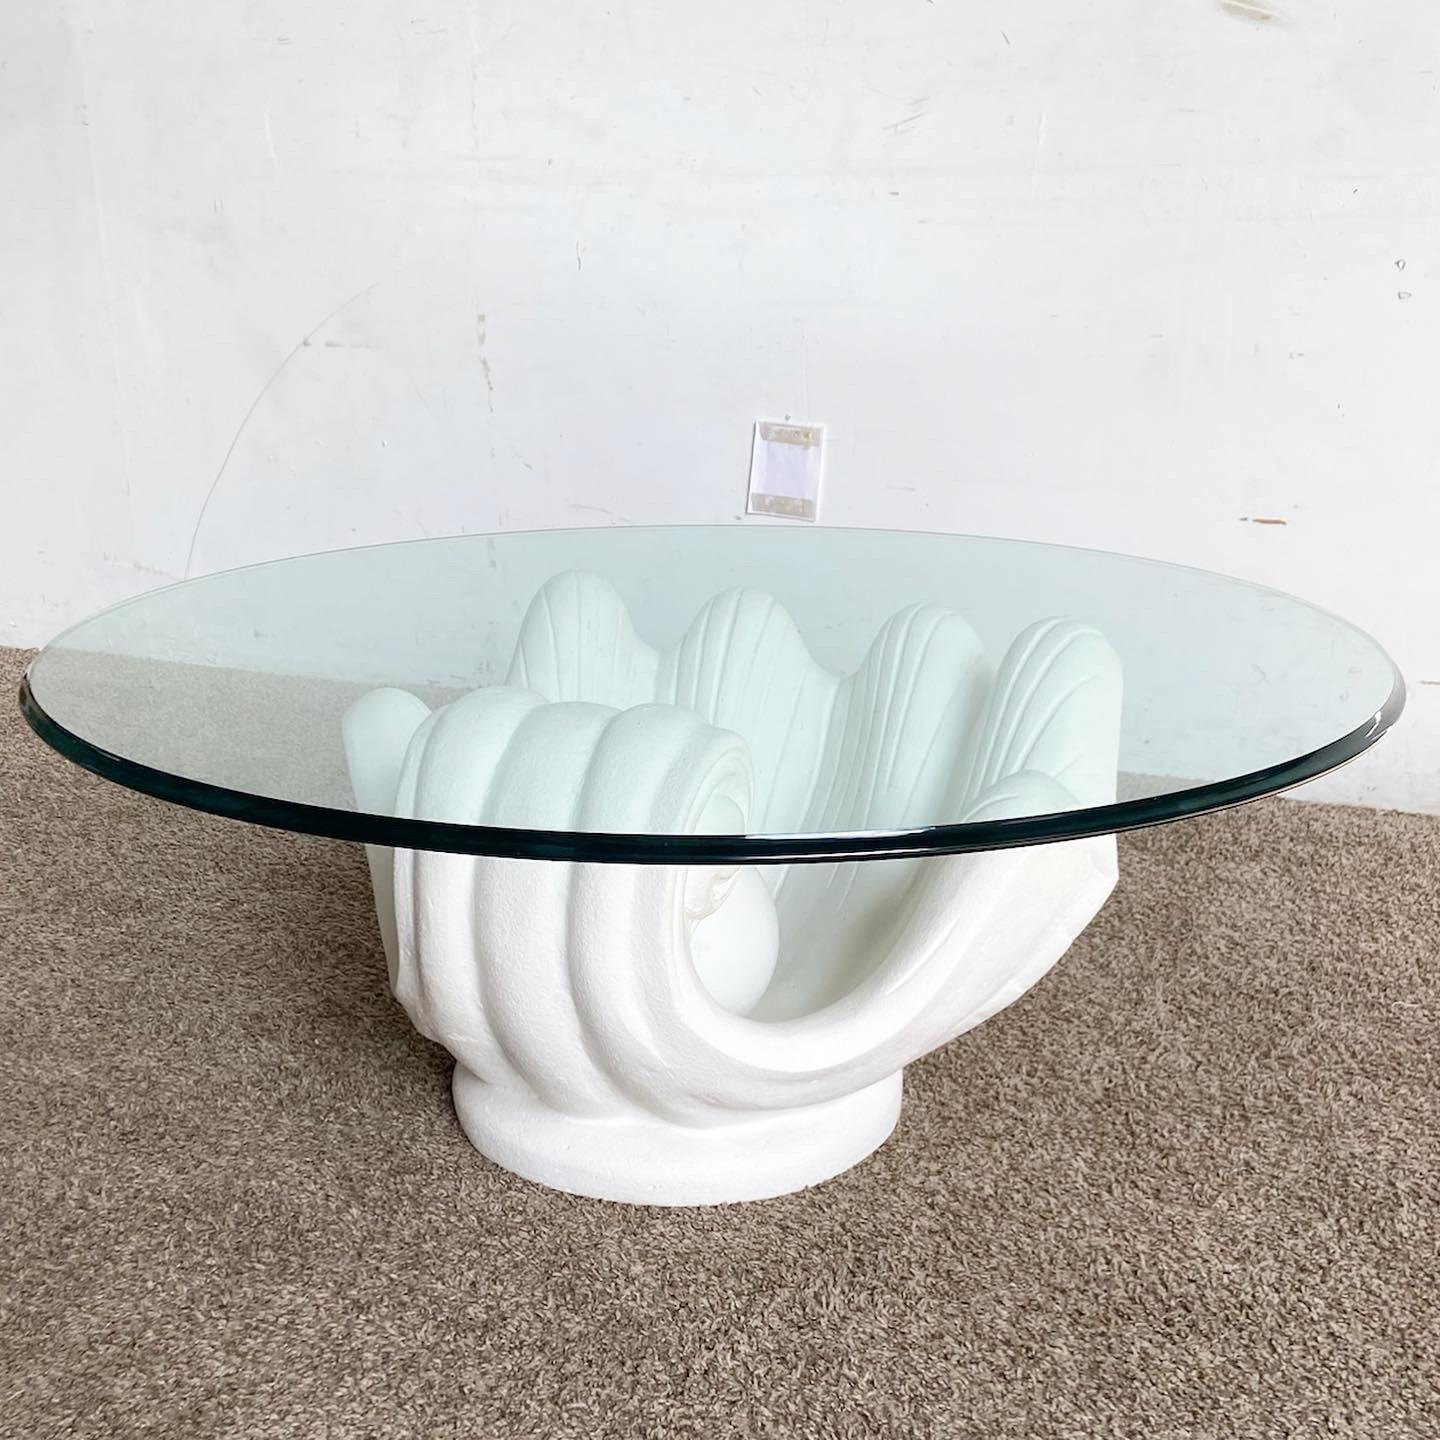 American Regency Modern White Plaster Clam Shell Glass Top Coffee Table For Sale